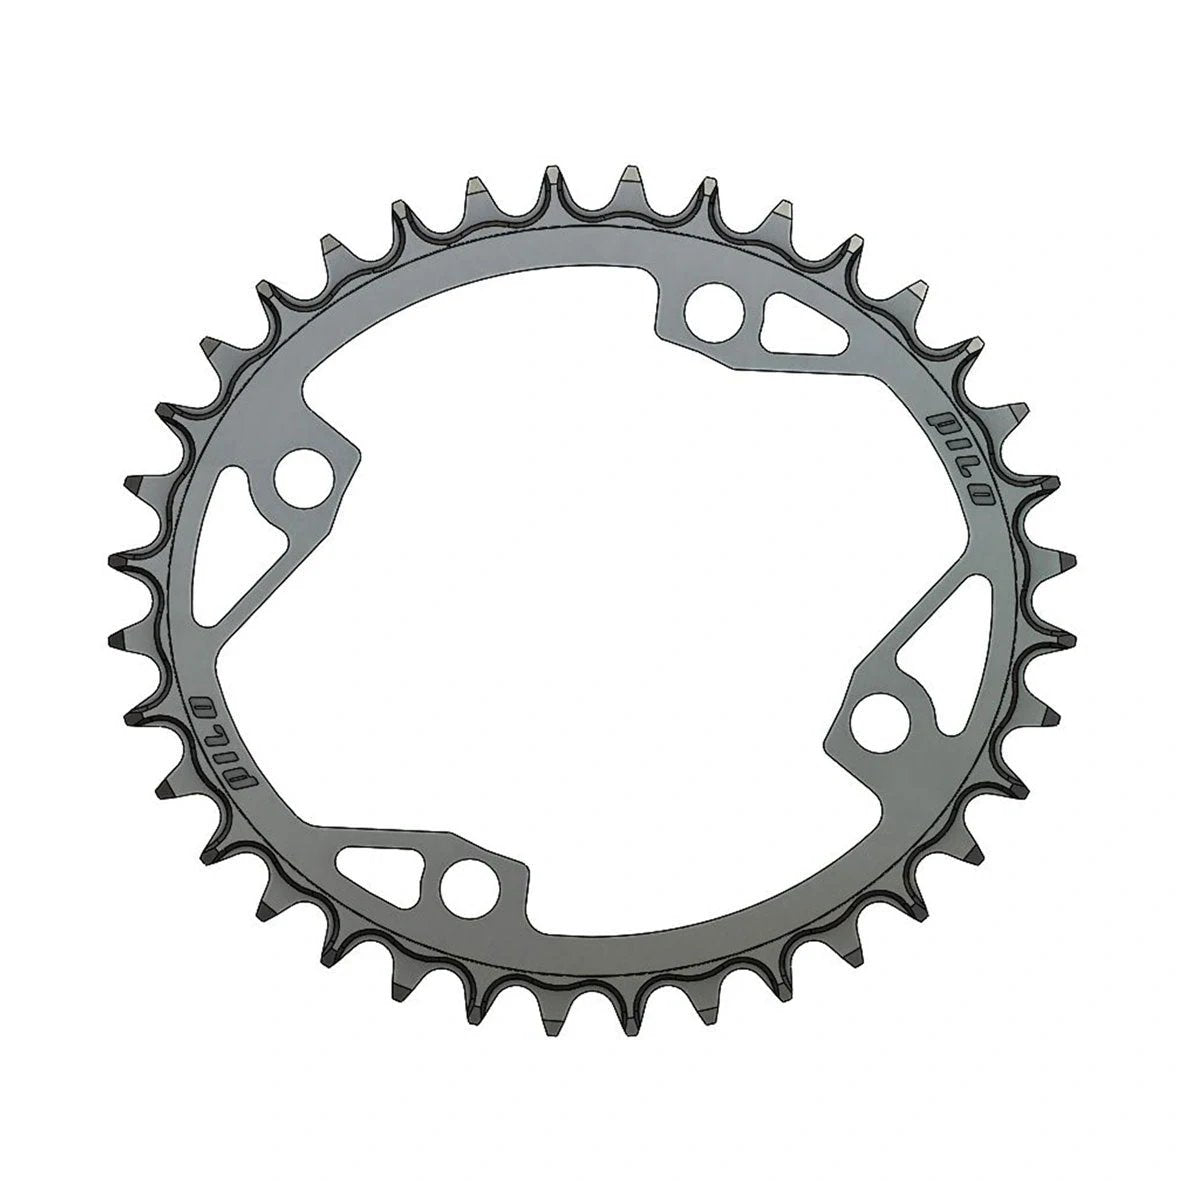 Pilo 36T 104Bcd Chainring For Cranks - Replacement Chainrings